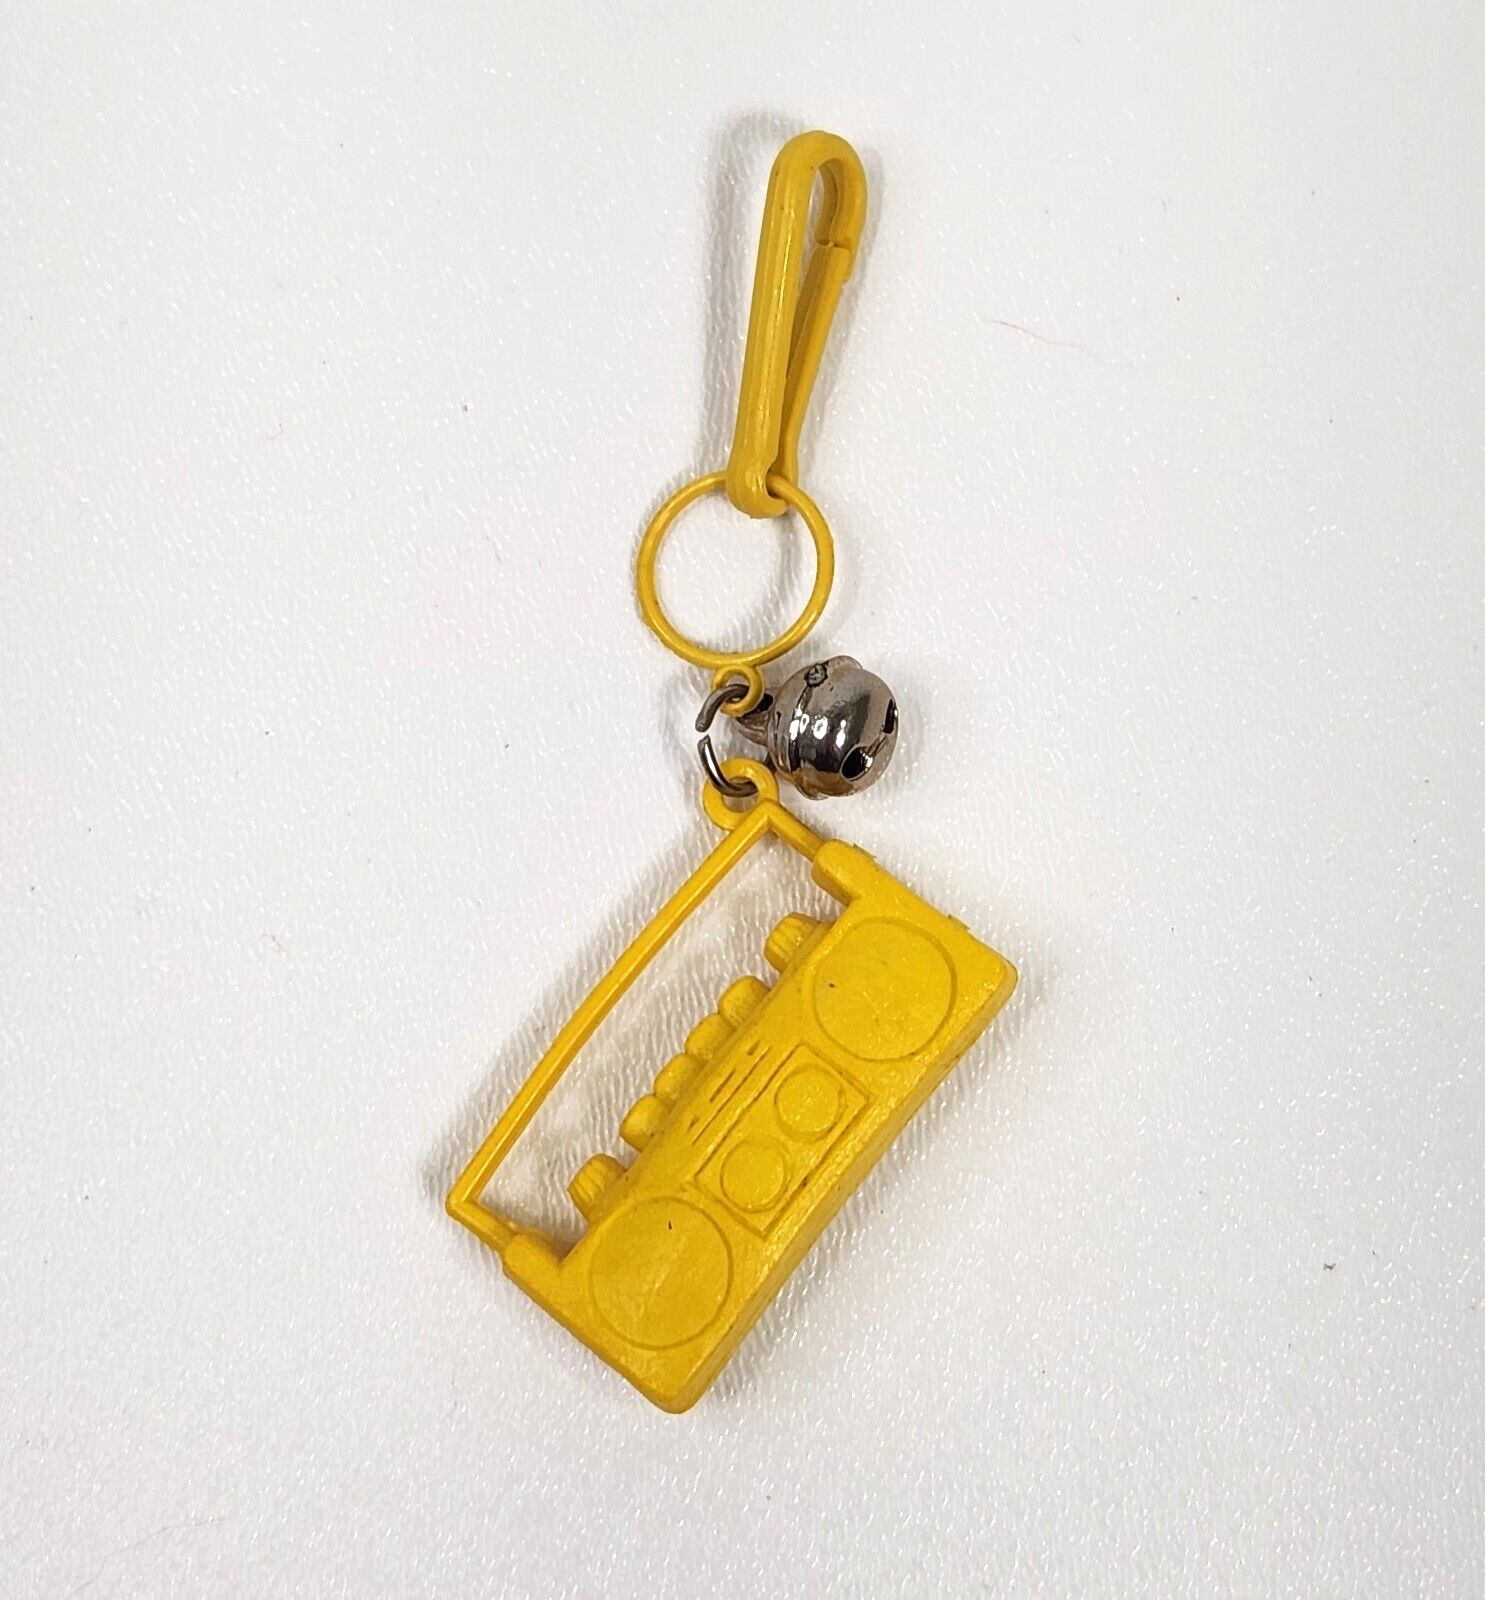 Vintage 1980s Plastic Bell Charm Portable Radio Cassette For 80s Necklace